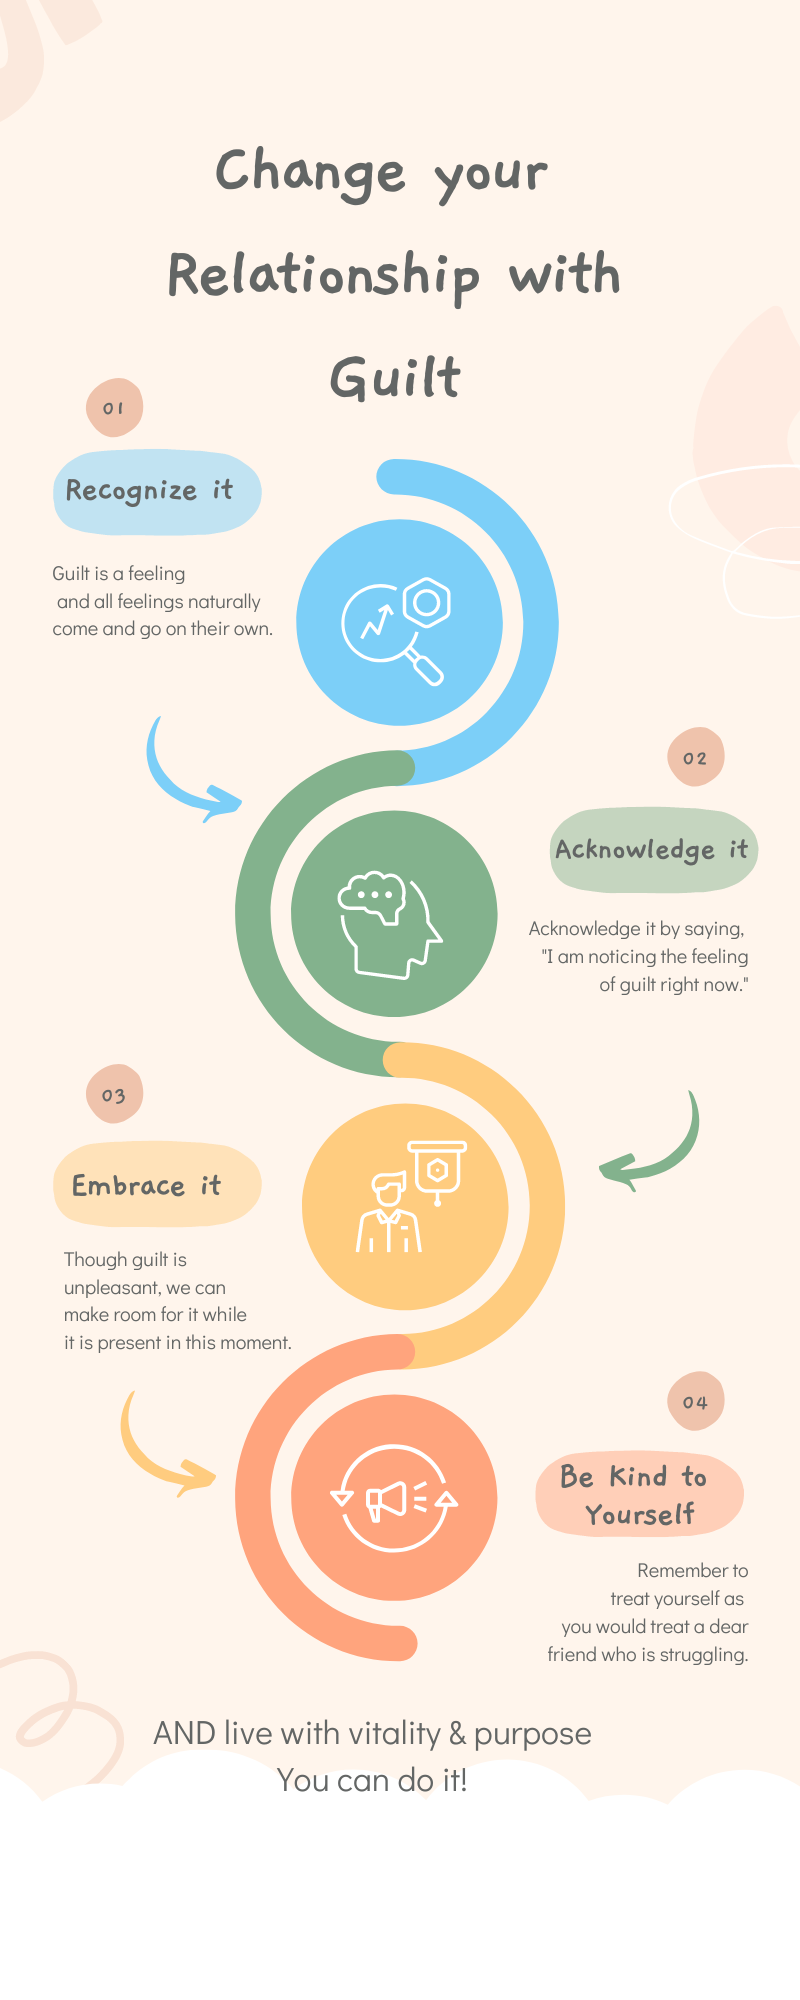 Change your relationship with guilt infographic